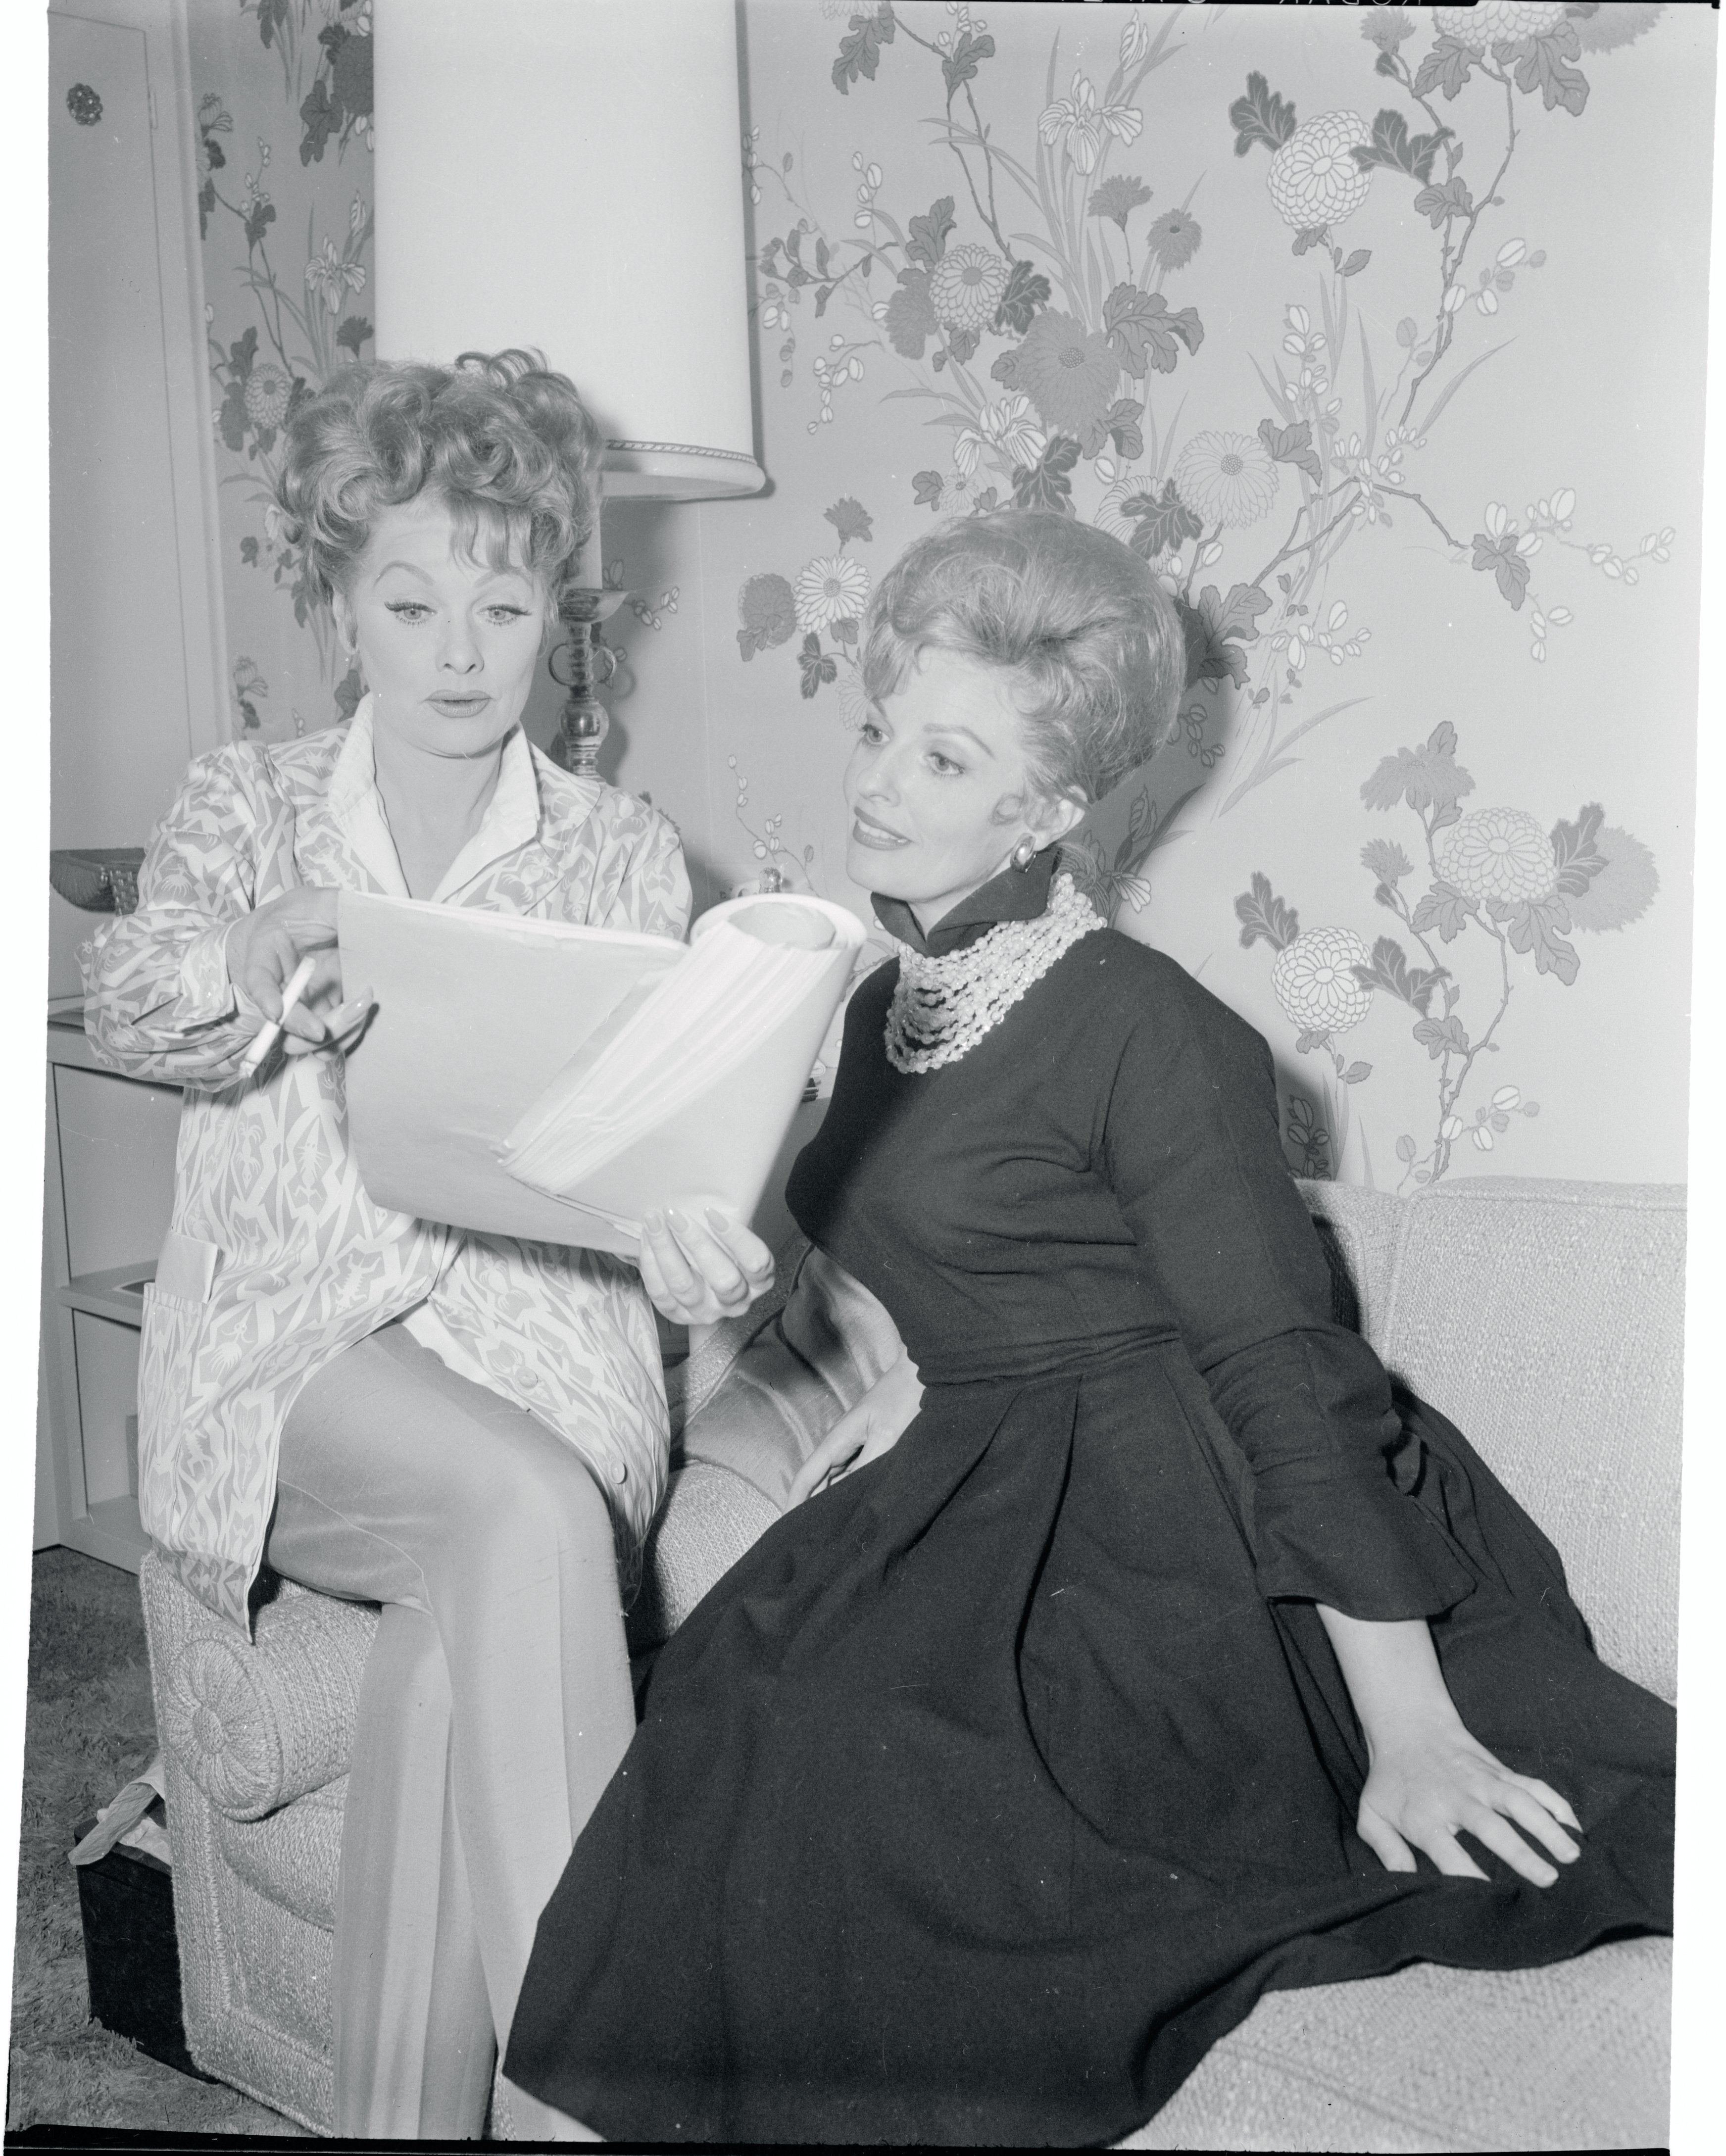 Carole Cook and Lucille Ball in an undated black and white photo | Source: Getty Images